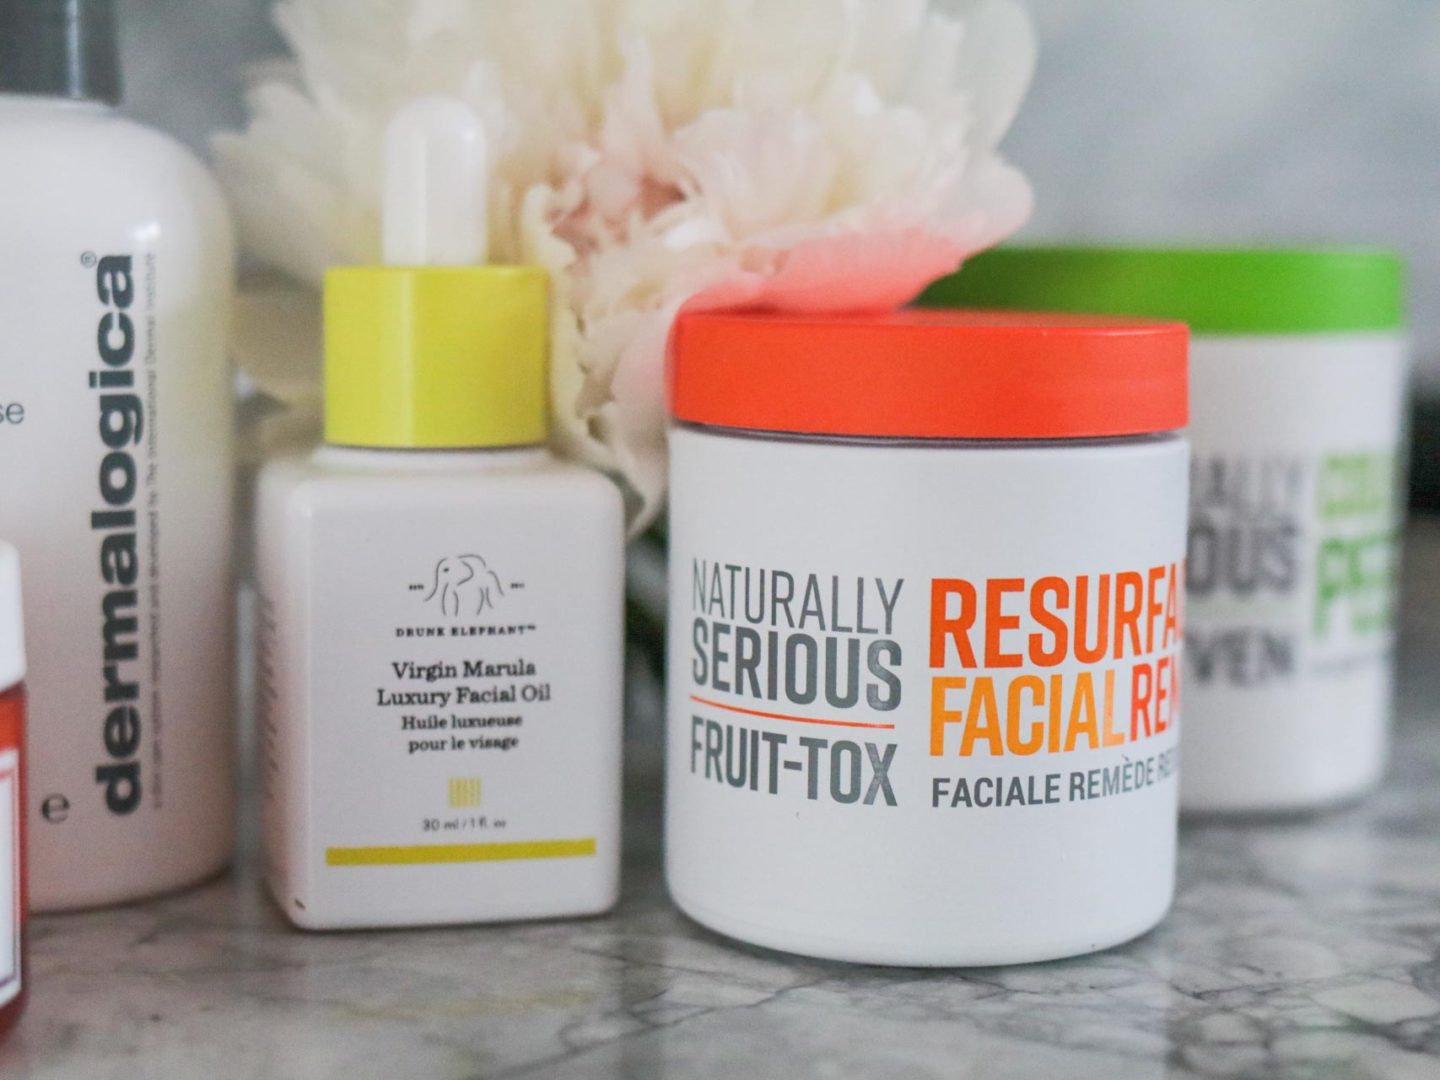 6 skincare revival product picks, featuring Drunk Elephant Virgin Marula Oil and Naturally Serious Fruit-tox